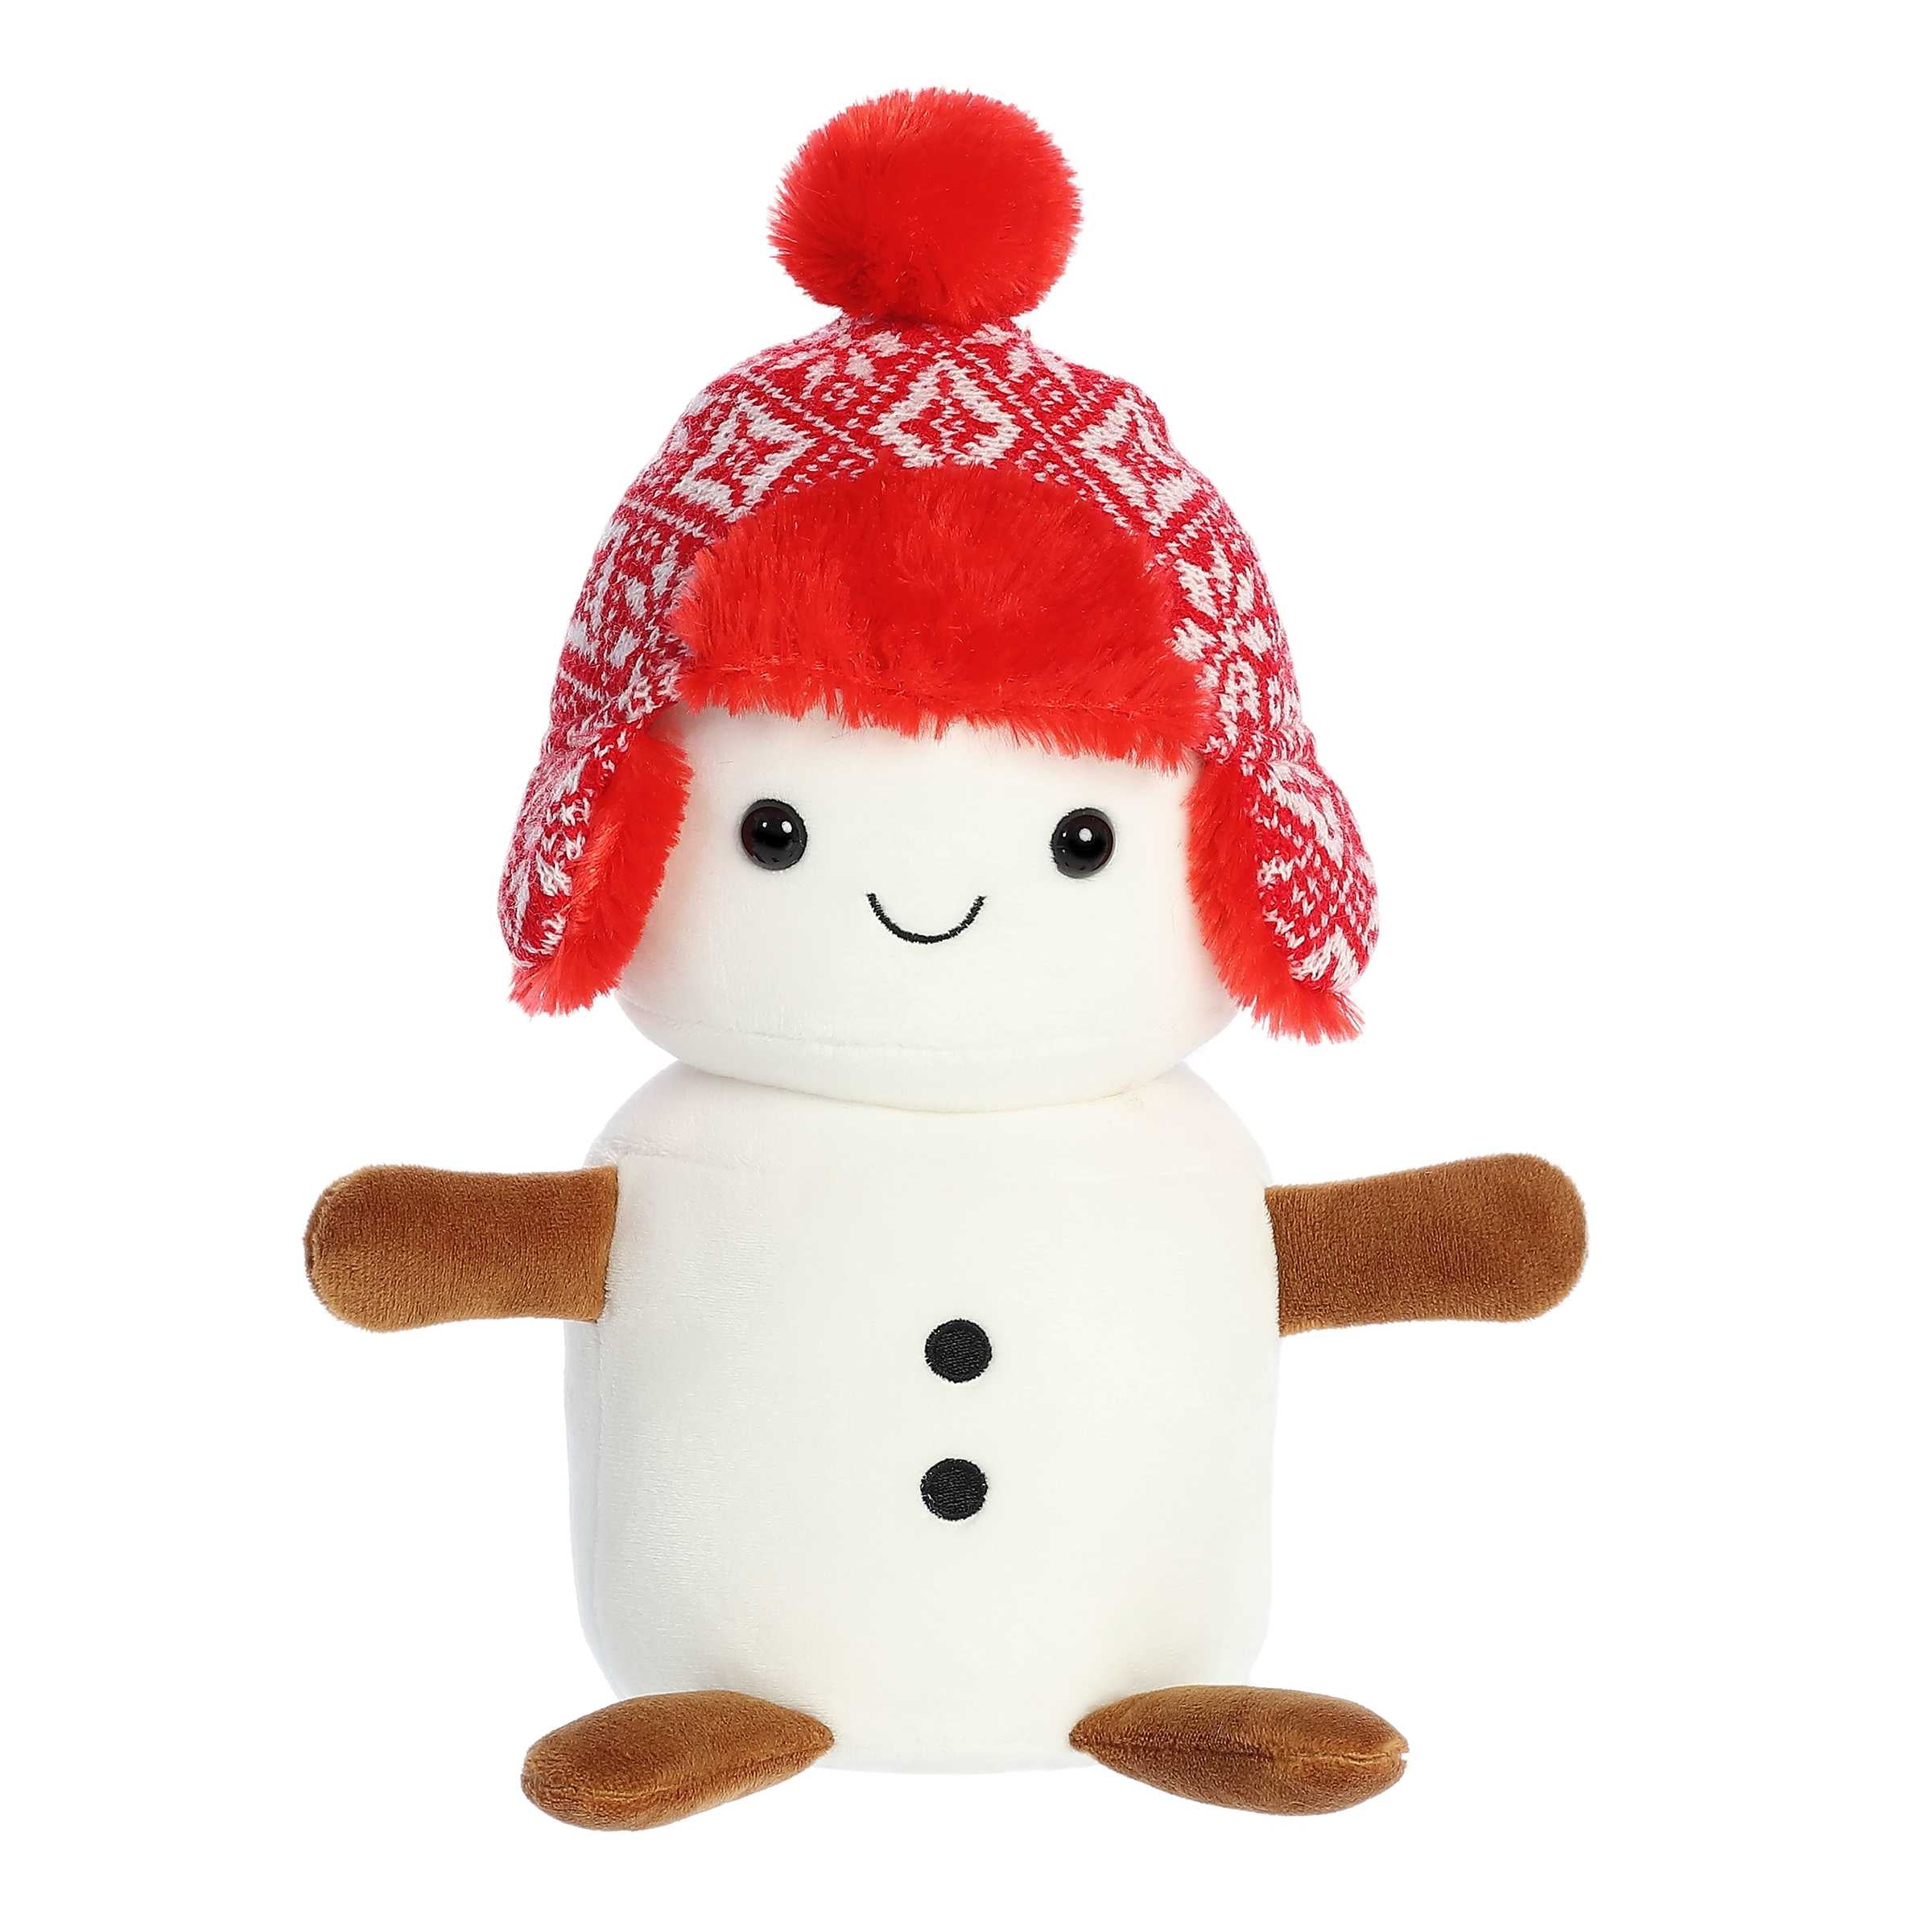 Smiling mini white snowman plushie with tiny arms and legs wearing a red knit winter beanie with a pompom on top